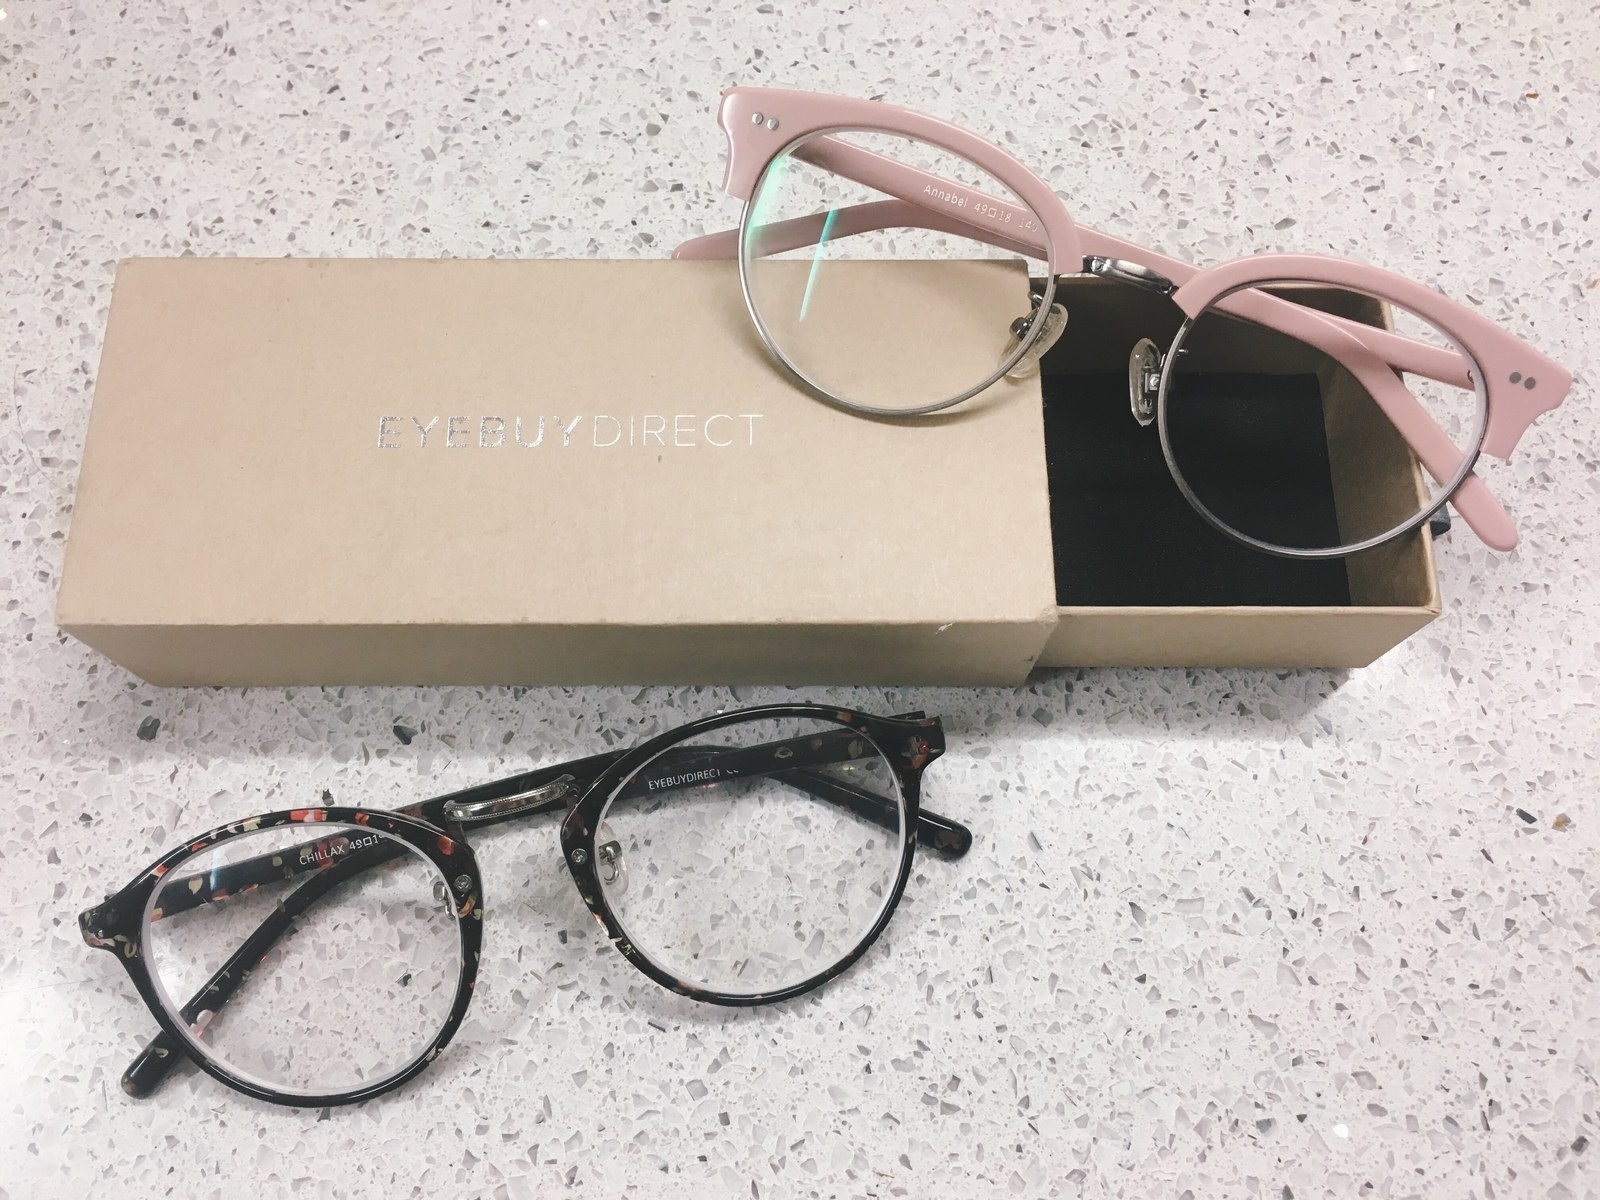 Super Affordable Prescription Glasses Styled by Sarah {$5 off code